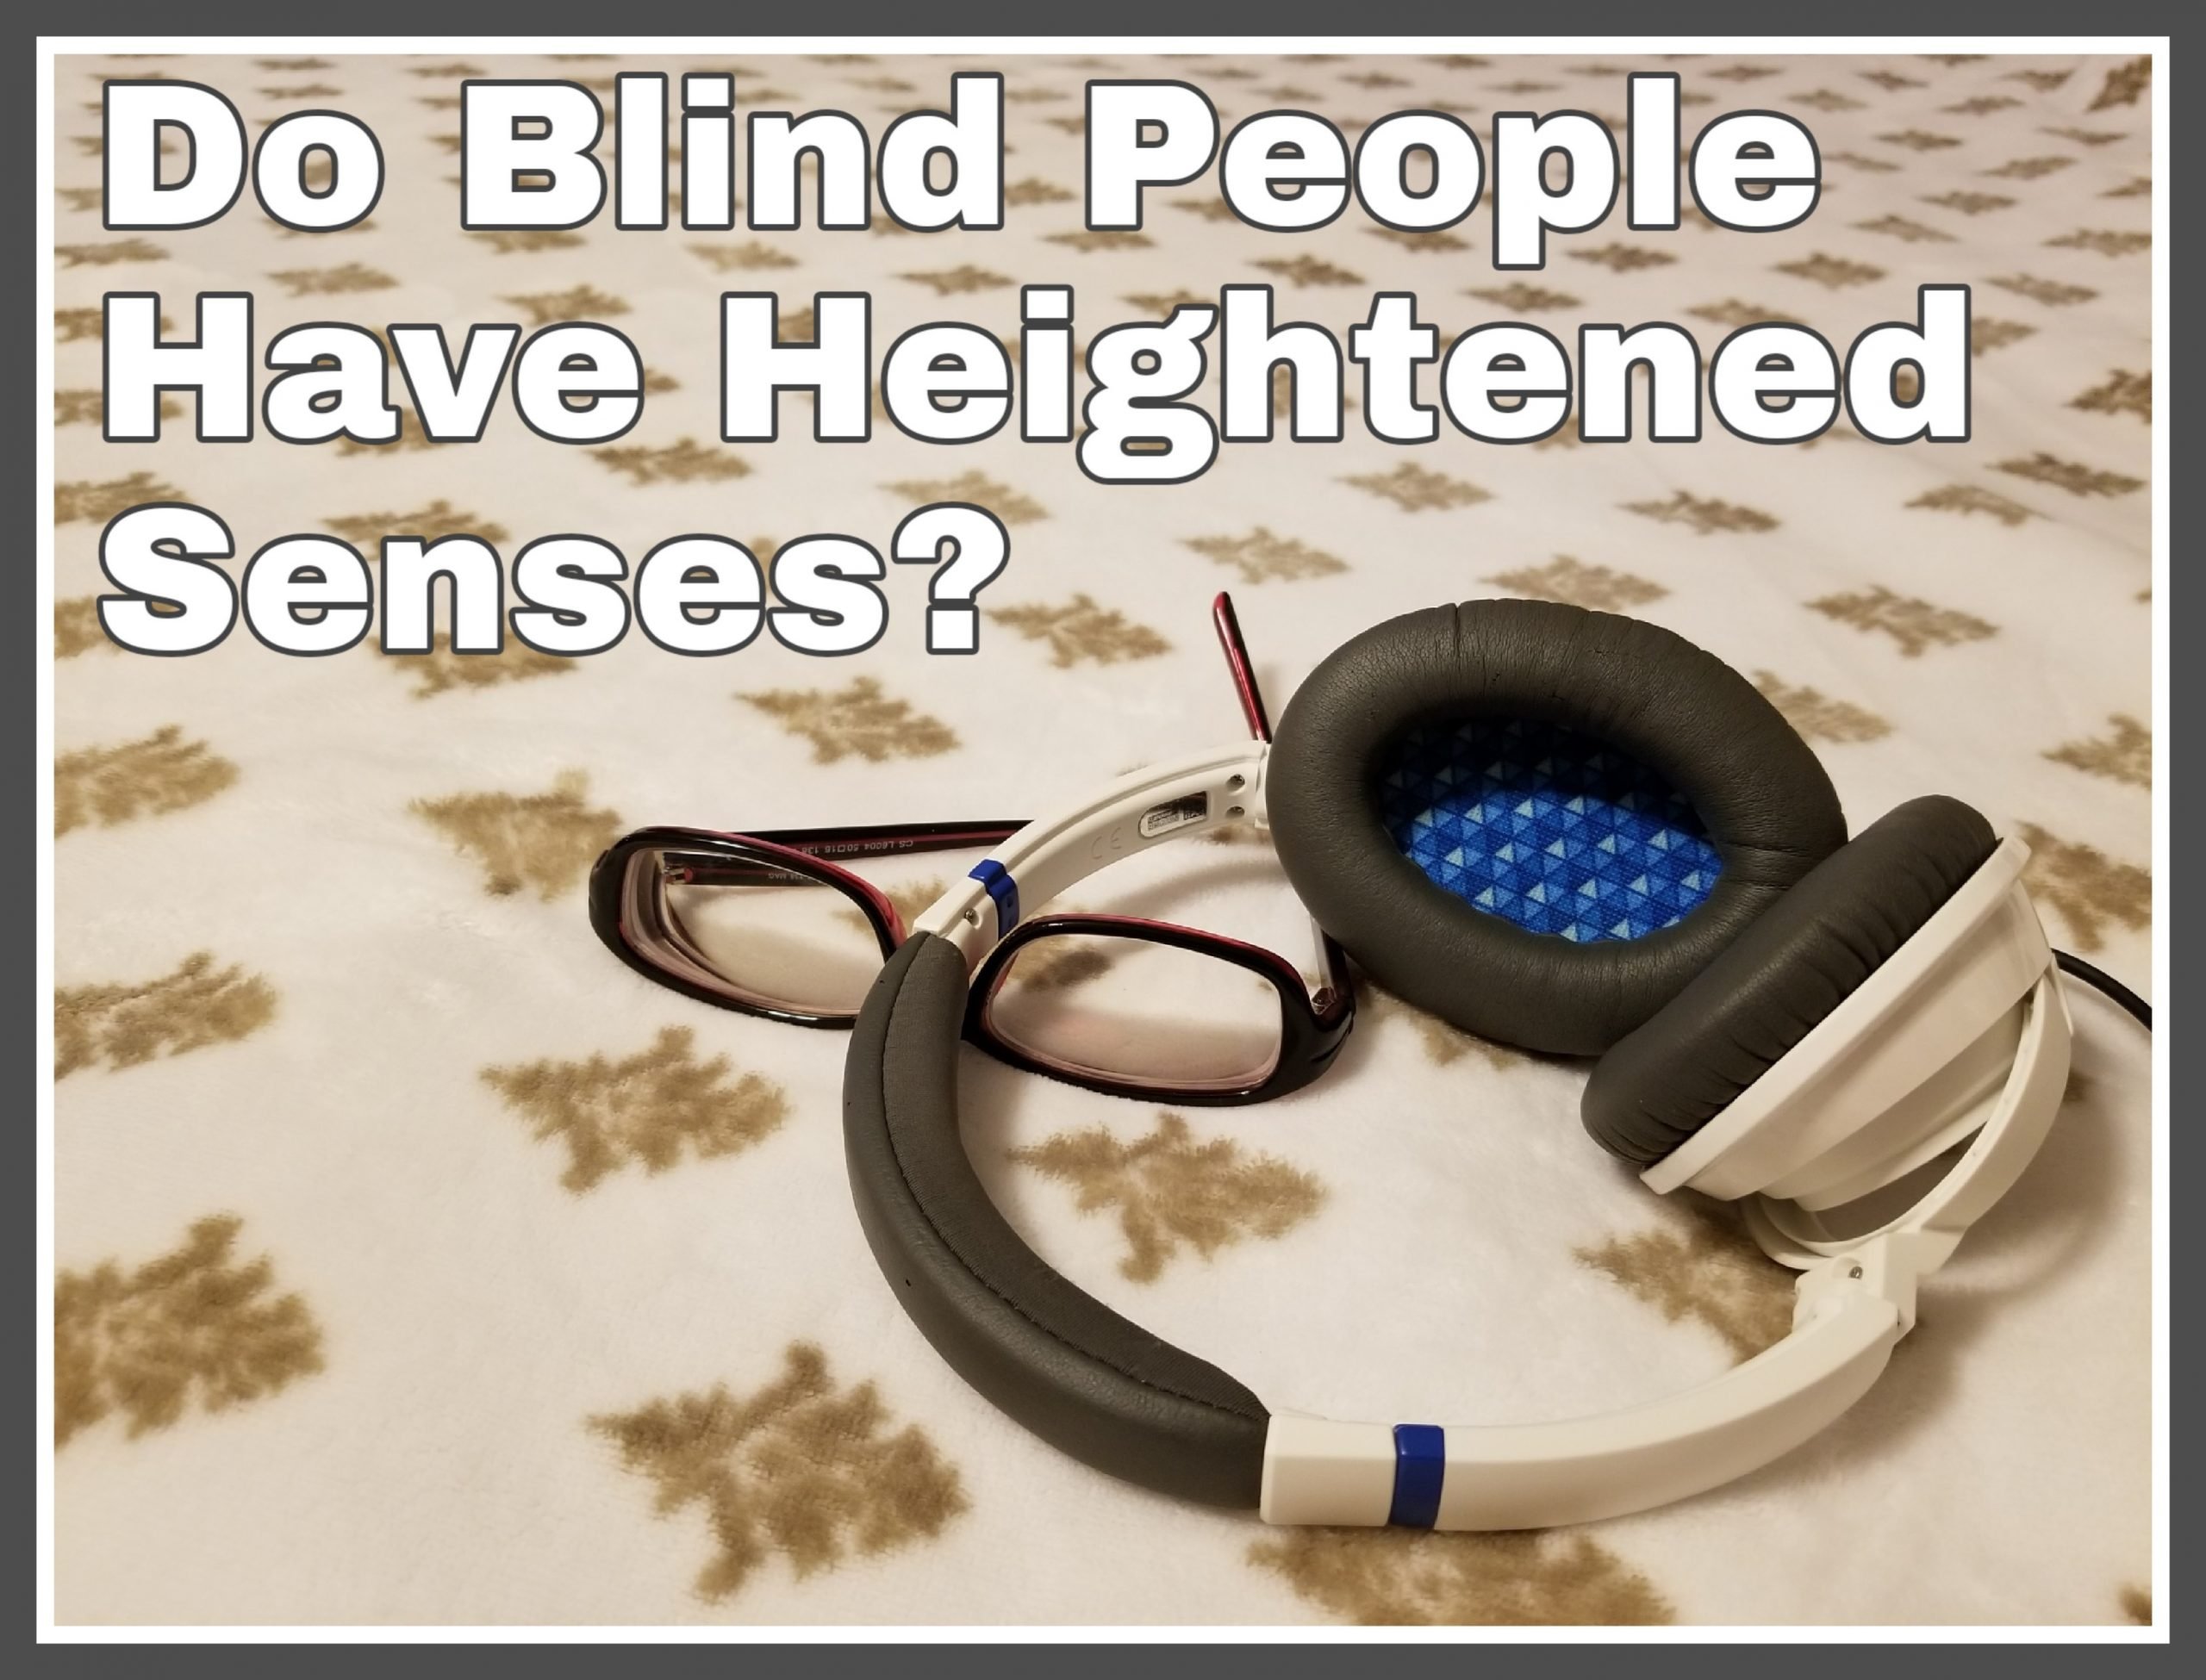 Do blind people have heightened senses?